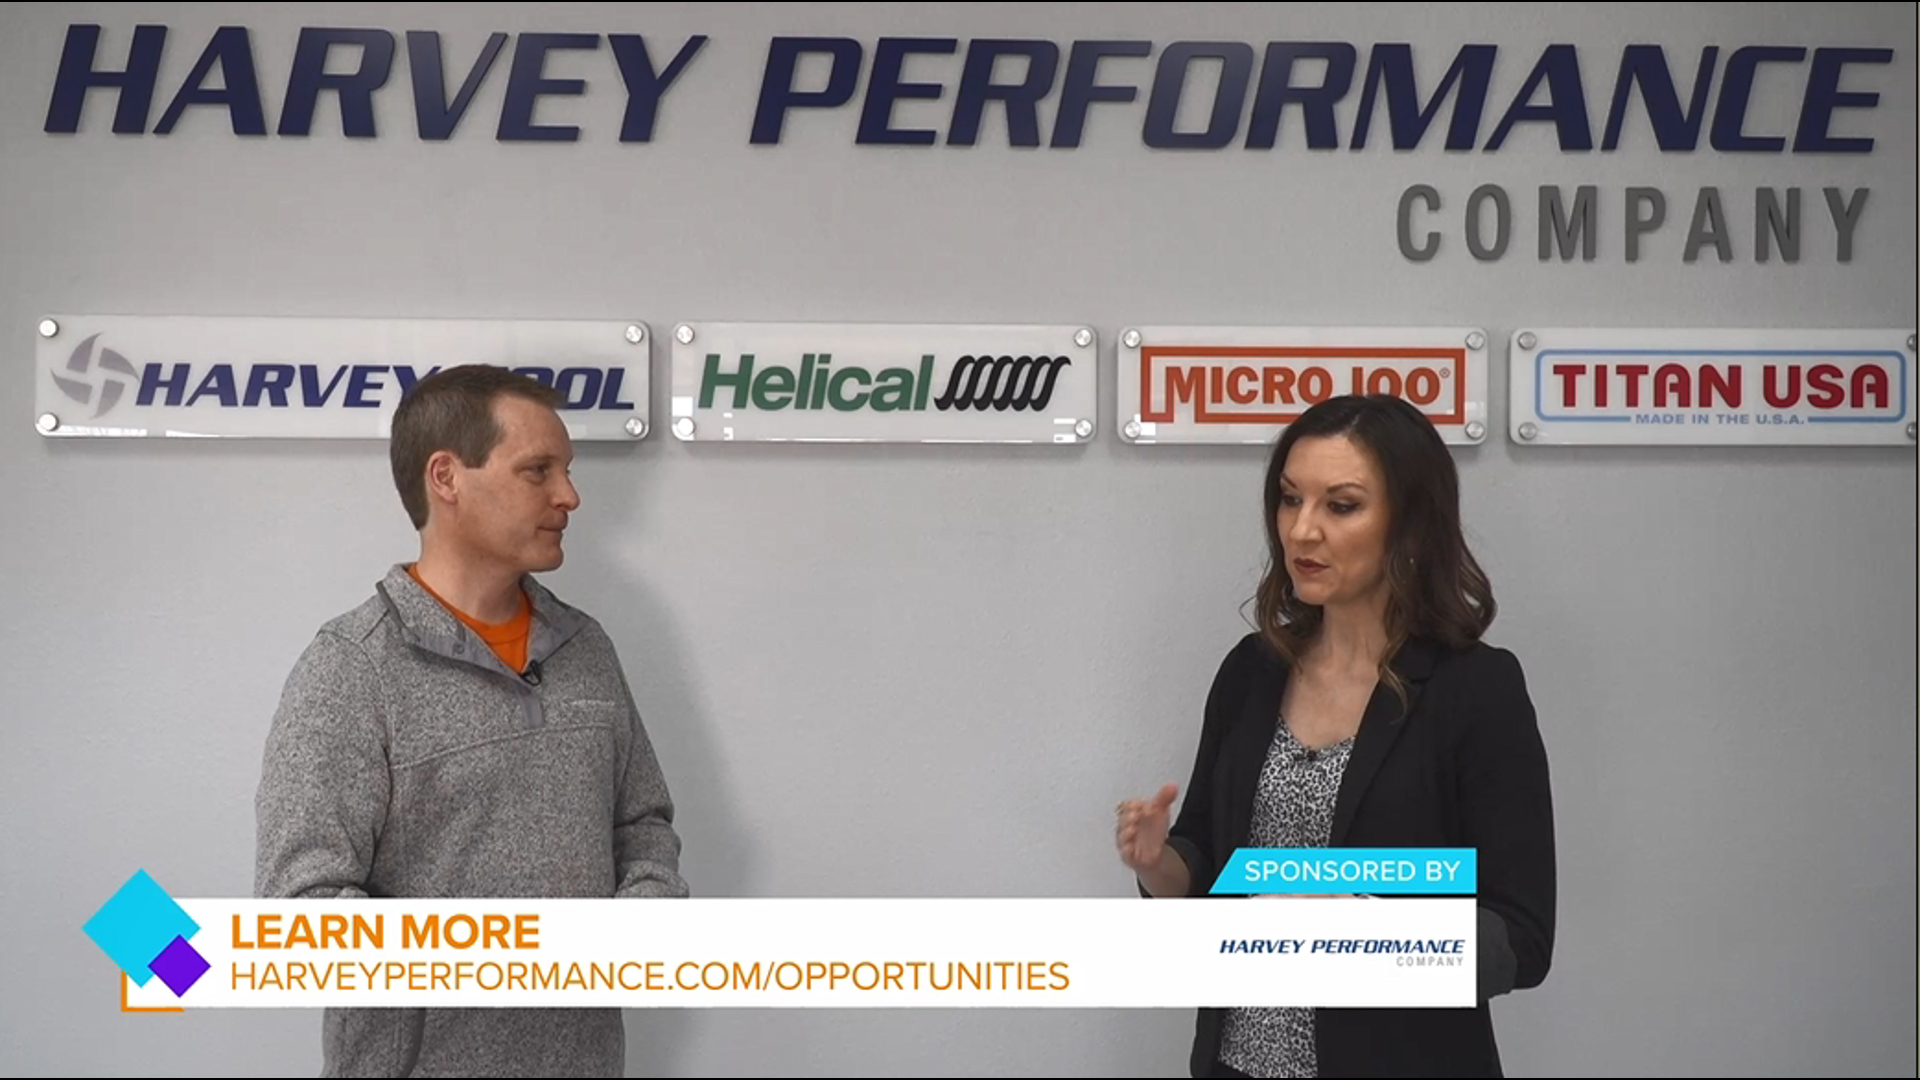 Sponsored by Harvey Performance. Harvey Performance is hiring! They manufacture high performance tools for various industries like aerospace, medical, auto, and etc.